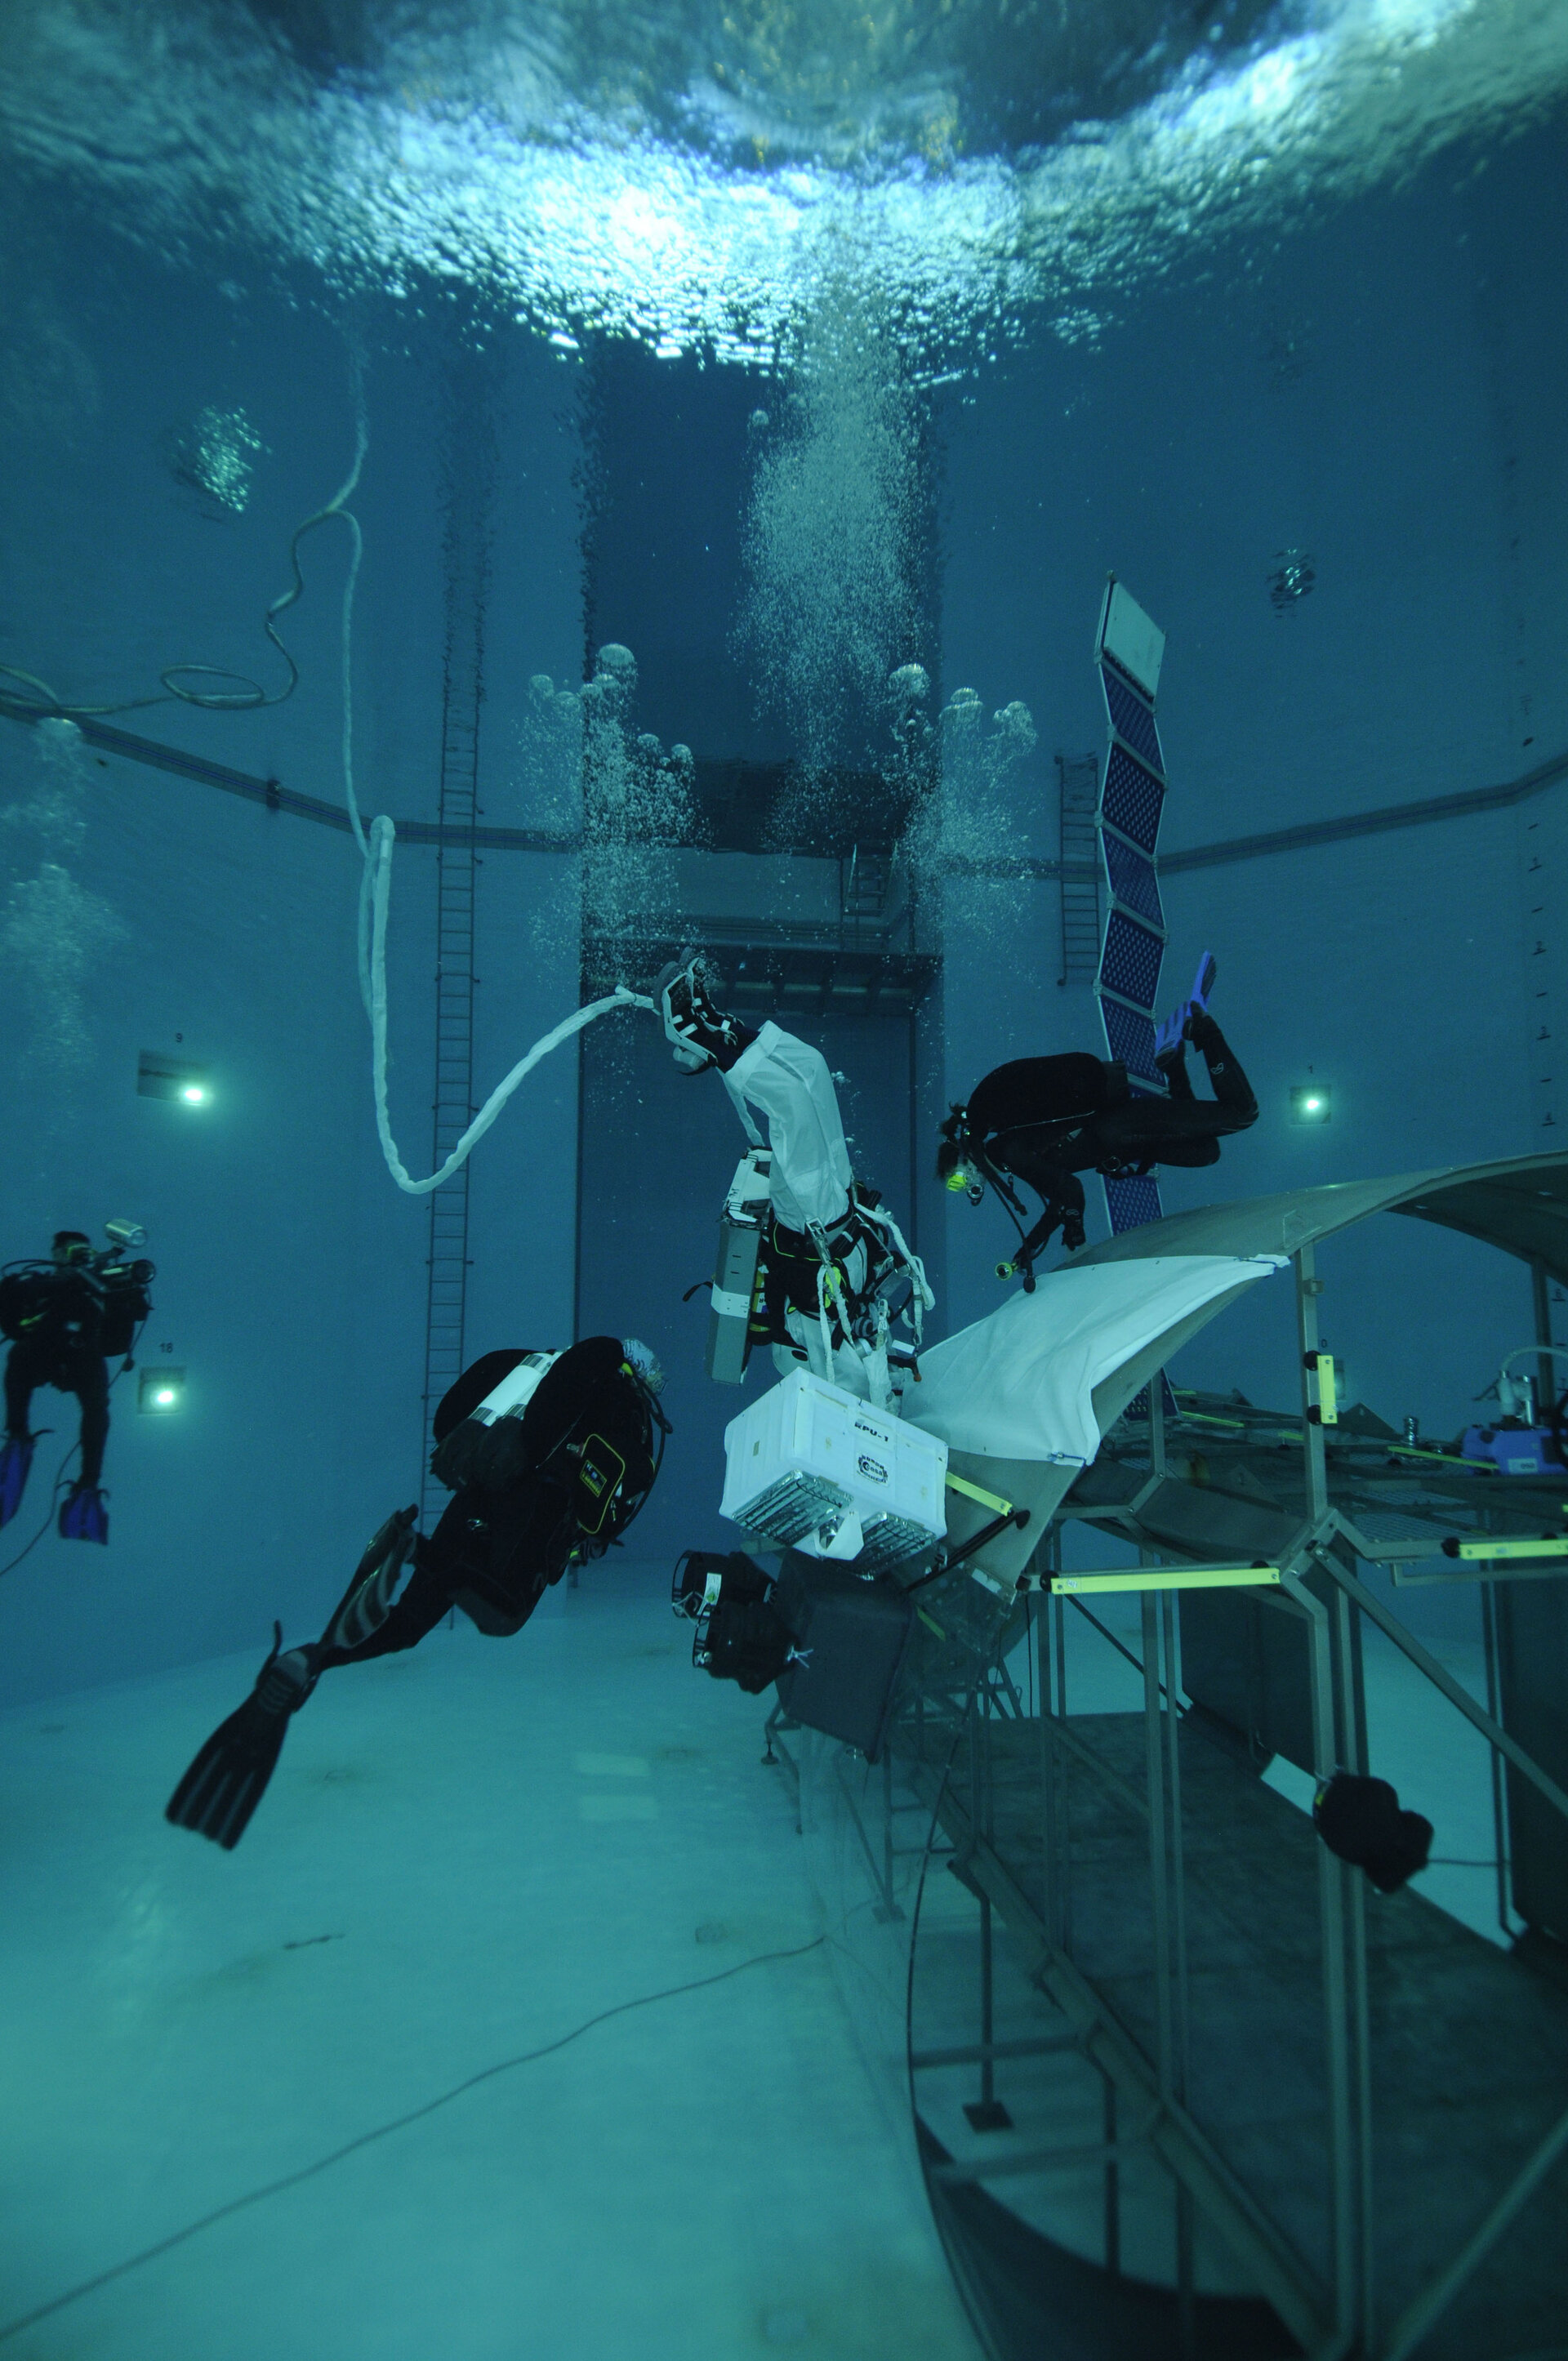 Timothy Peake during spacewalk training  in the Neutral Buoyancy Facility at EAC